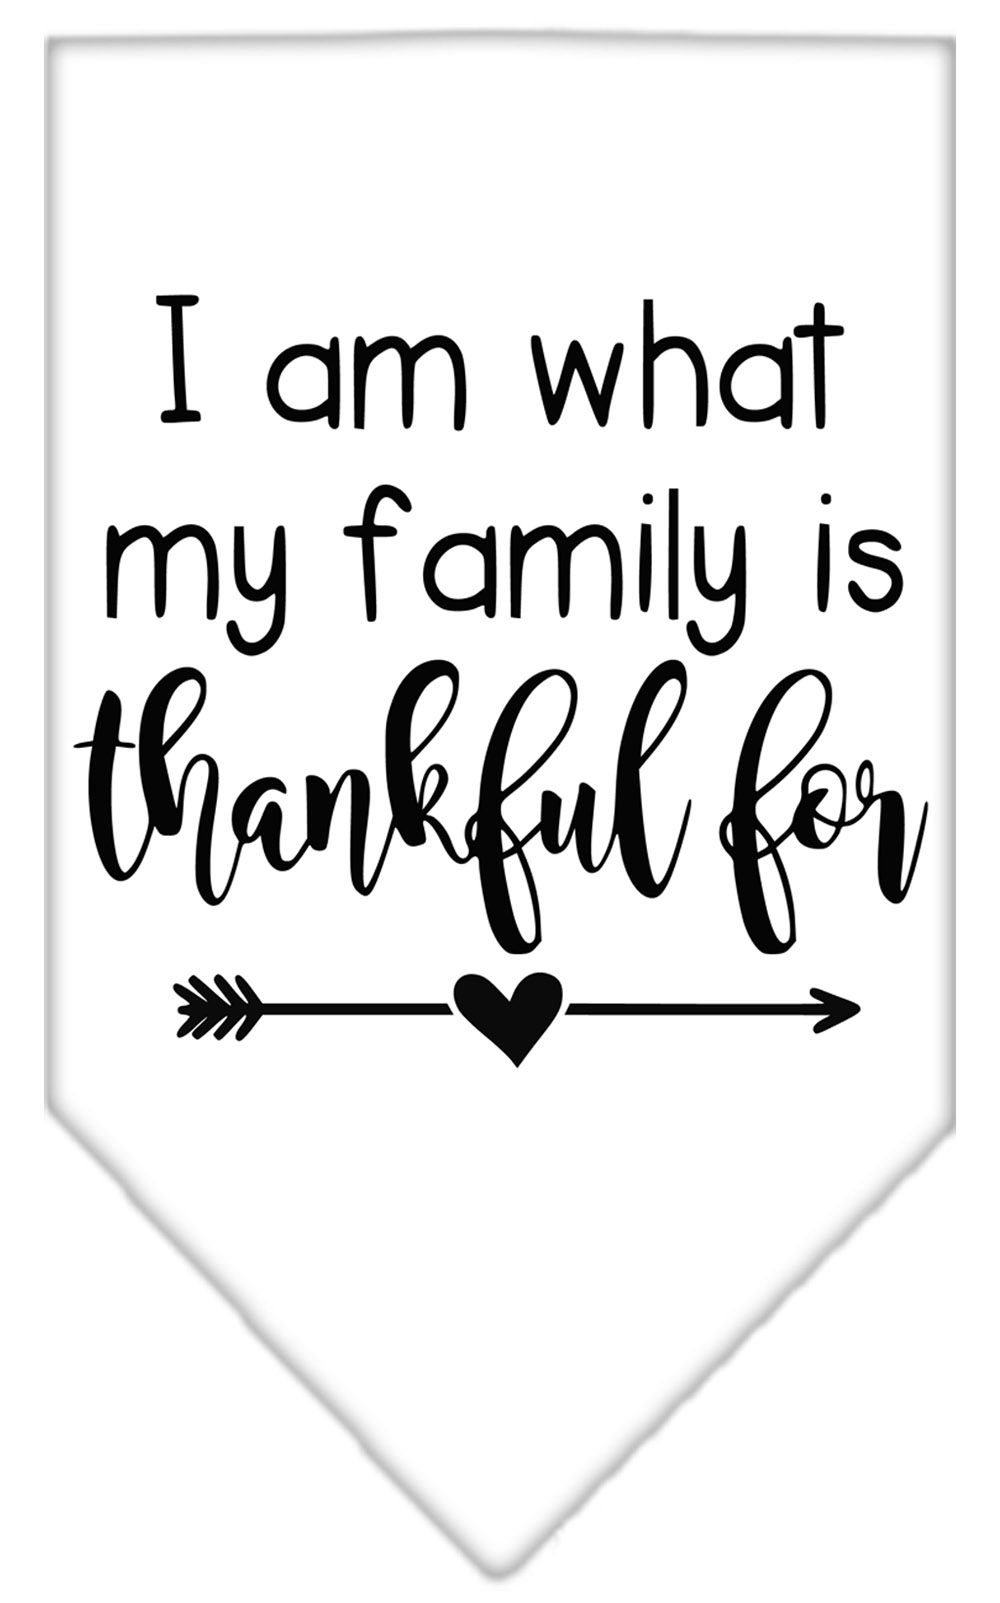 I Am What My Family is Thankful For Screen Print Bandana White Large